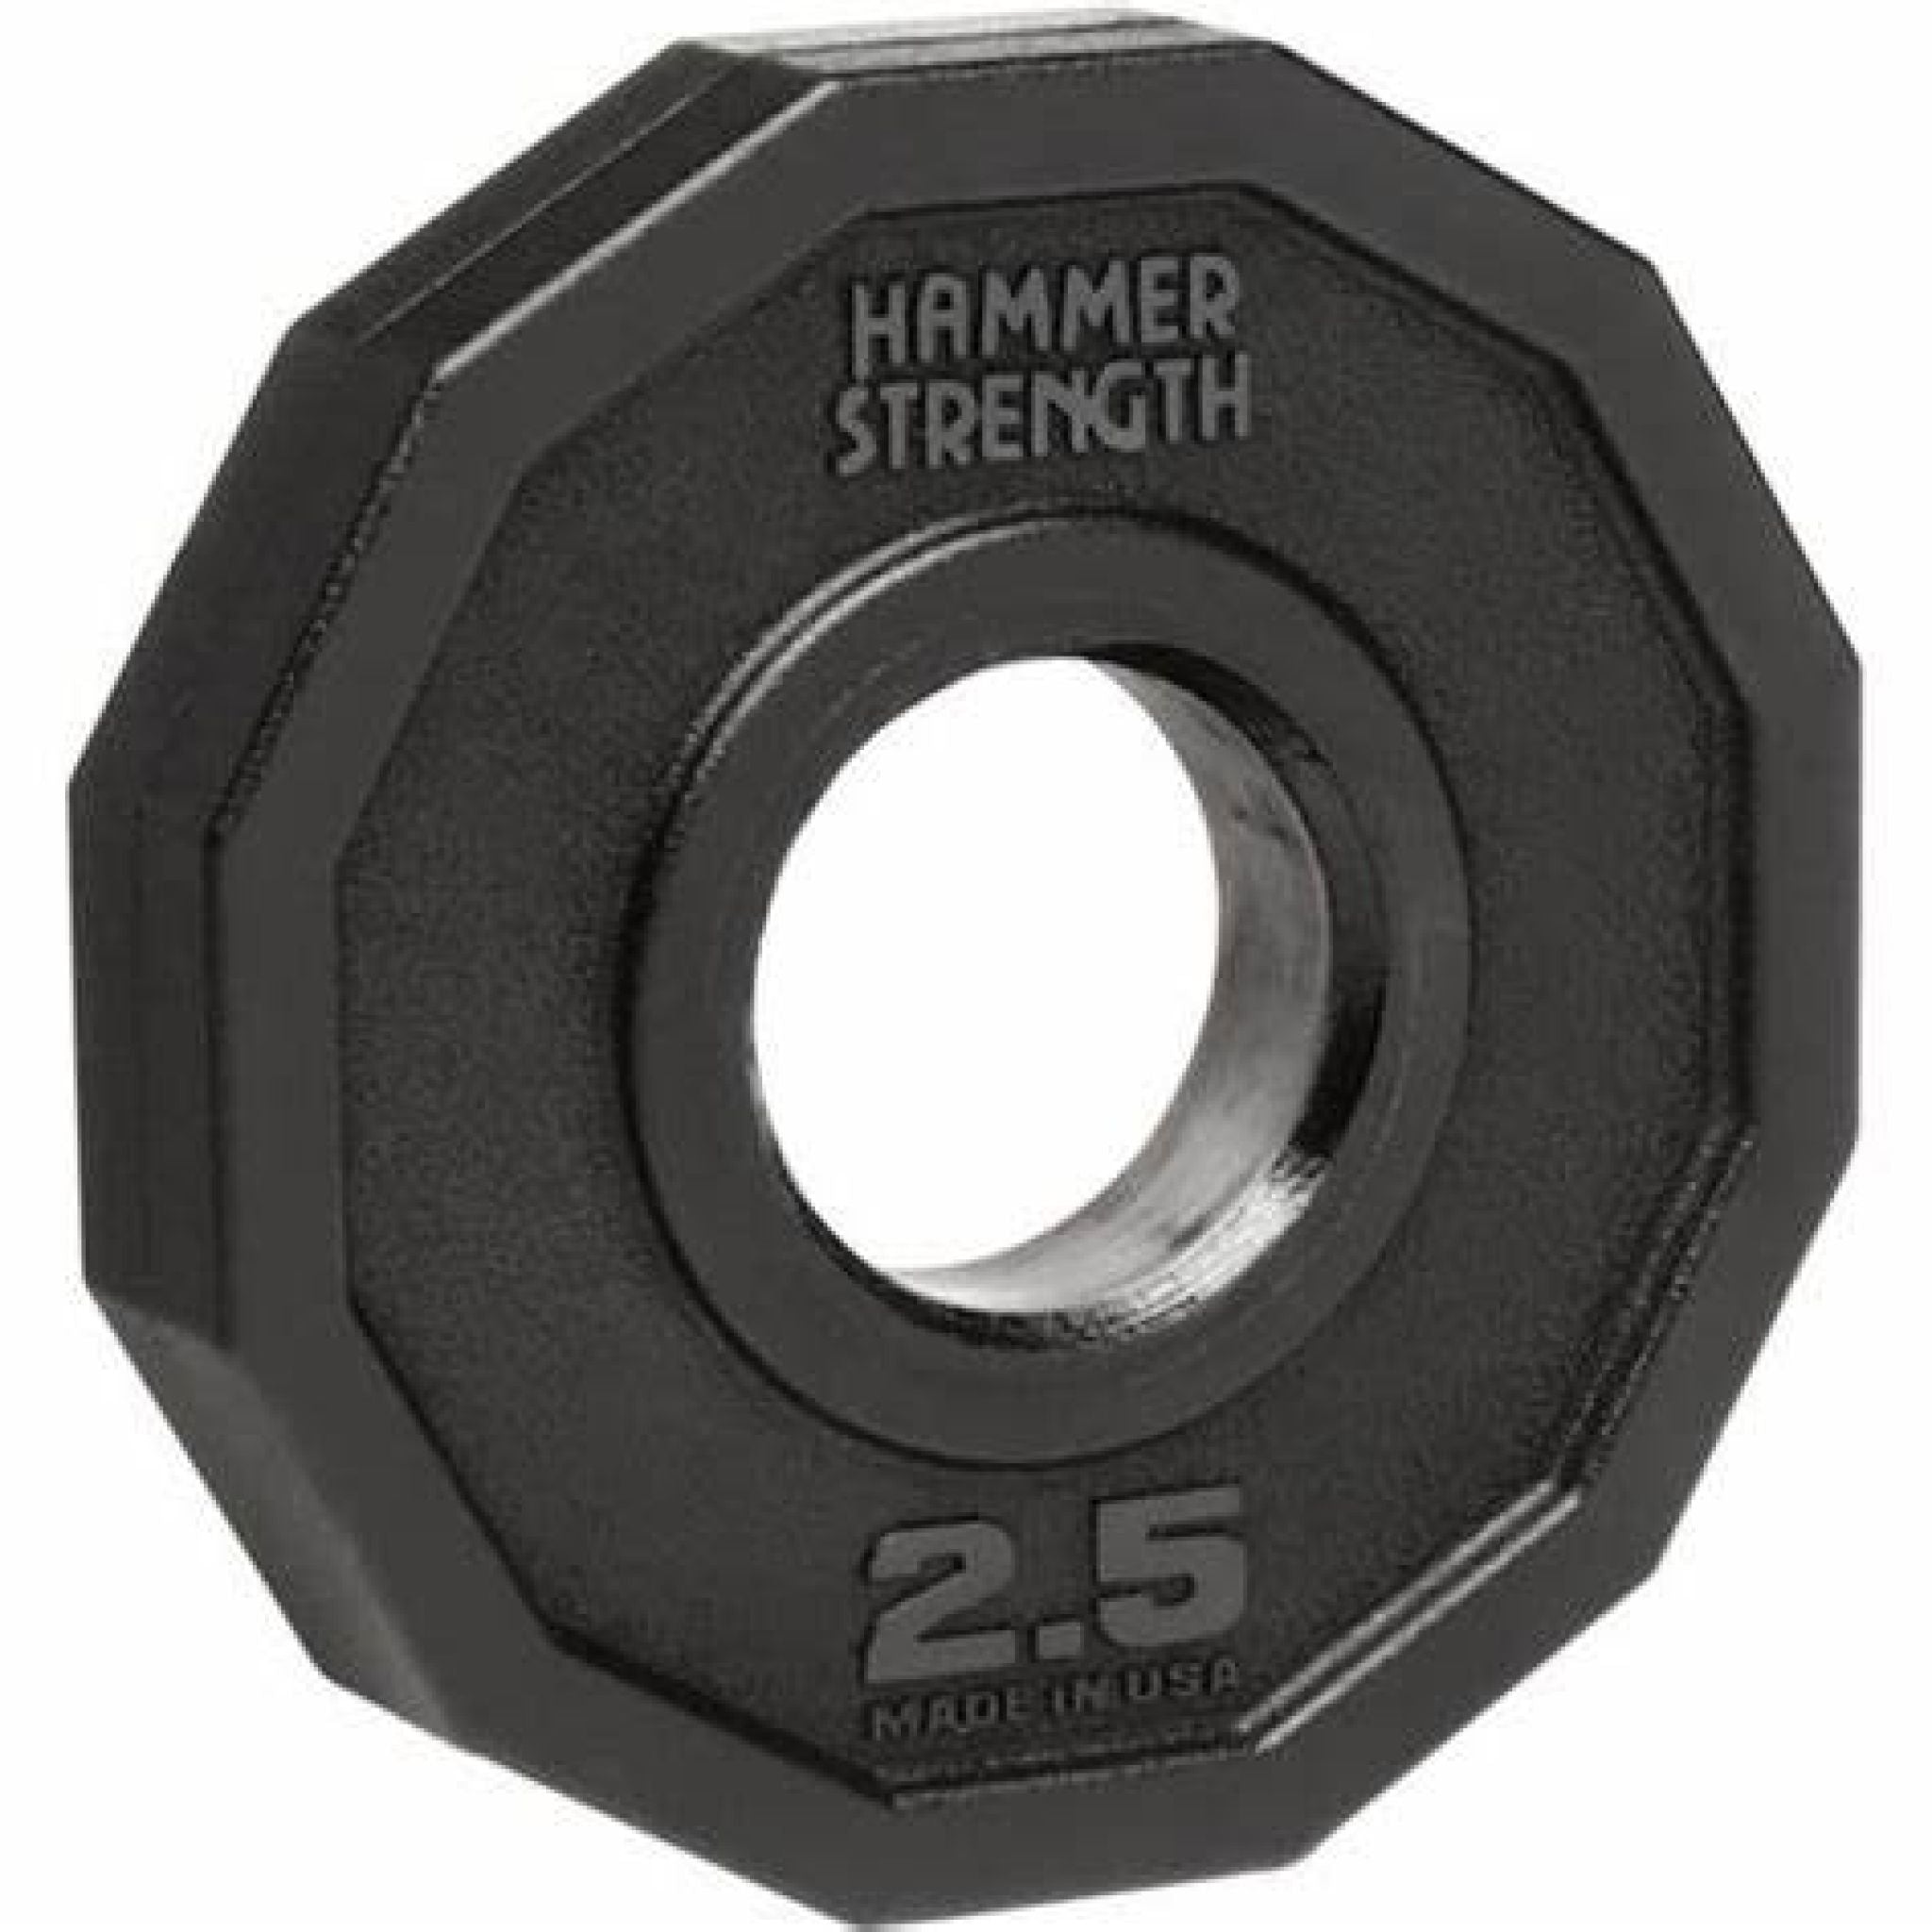 2.5 lb Weight Plate